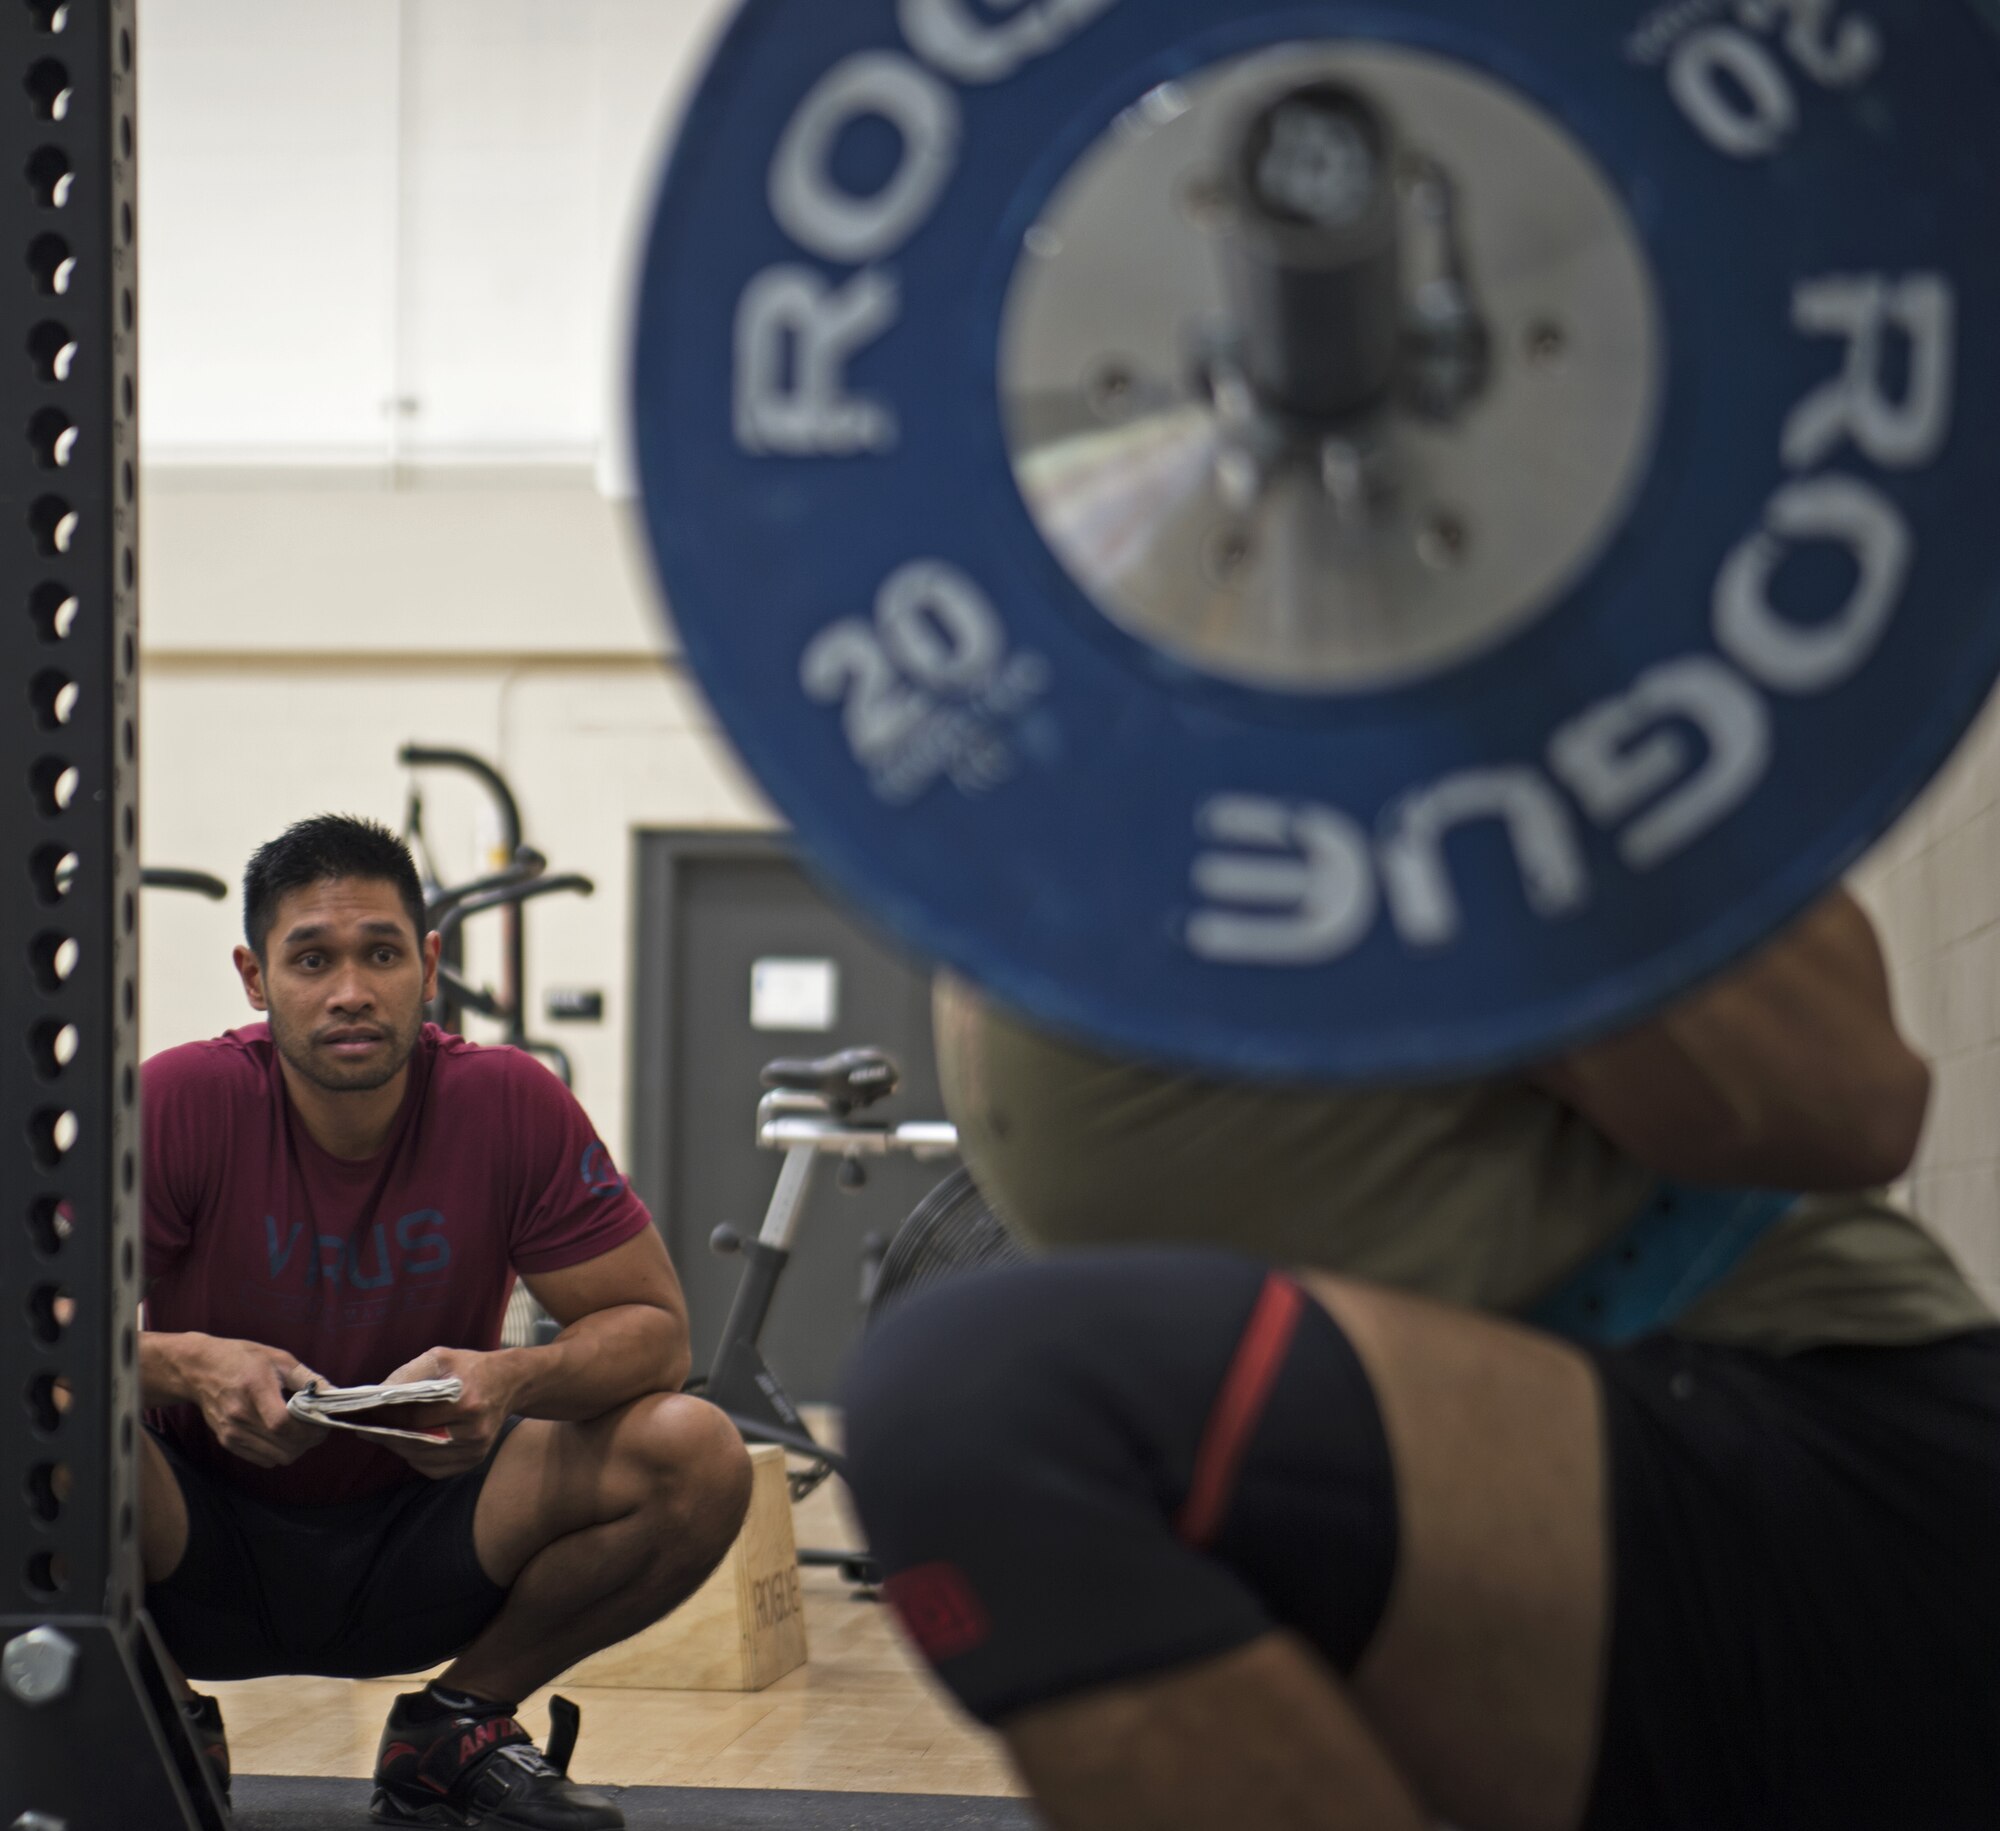 Clayton Bautista, Five Star Nutrition general manager, left, ensures Staff Sgt. Allen Plata, 20th Equipment Maintenance Squadron stockpile management crew chief, has proper form while power lifting at Shaw Air Force Base, S.C., Nov. 1, 2018.